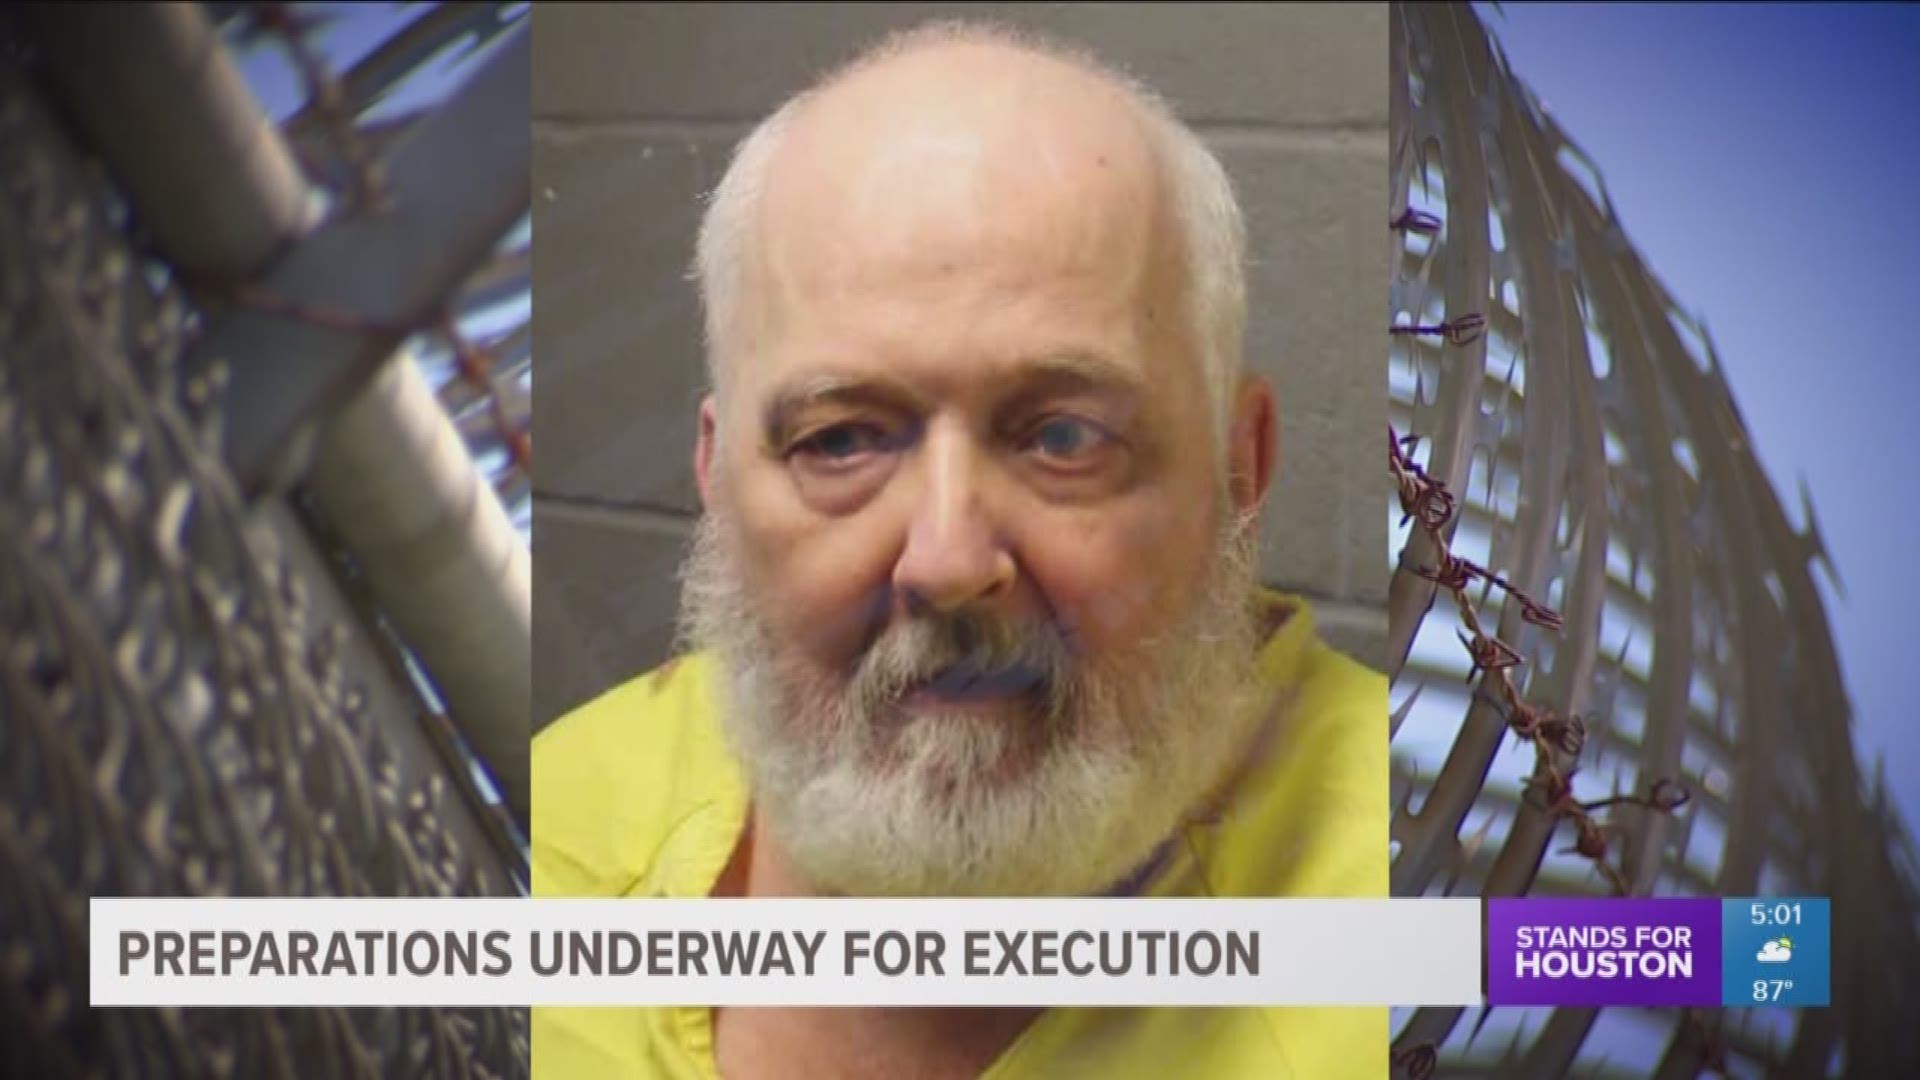 The execution of Danny Bible, also known at the "Ice Pick Killer," is set for Wednesday evening.